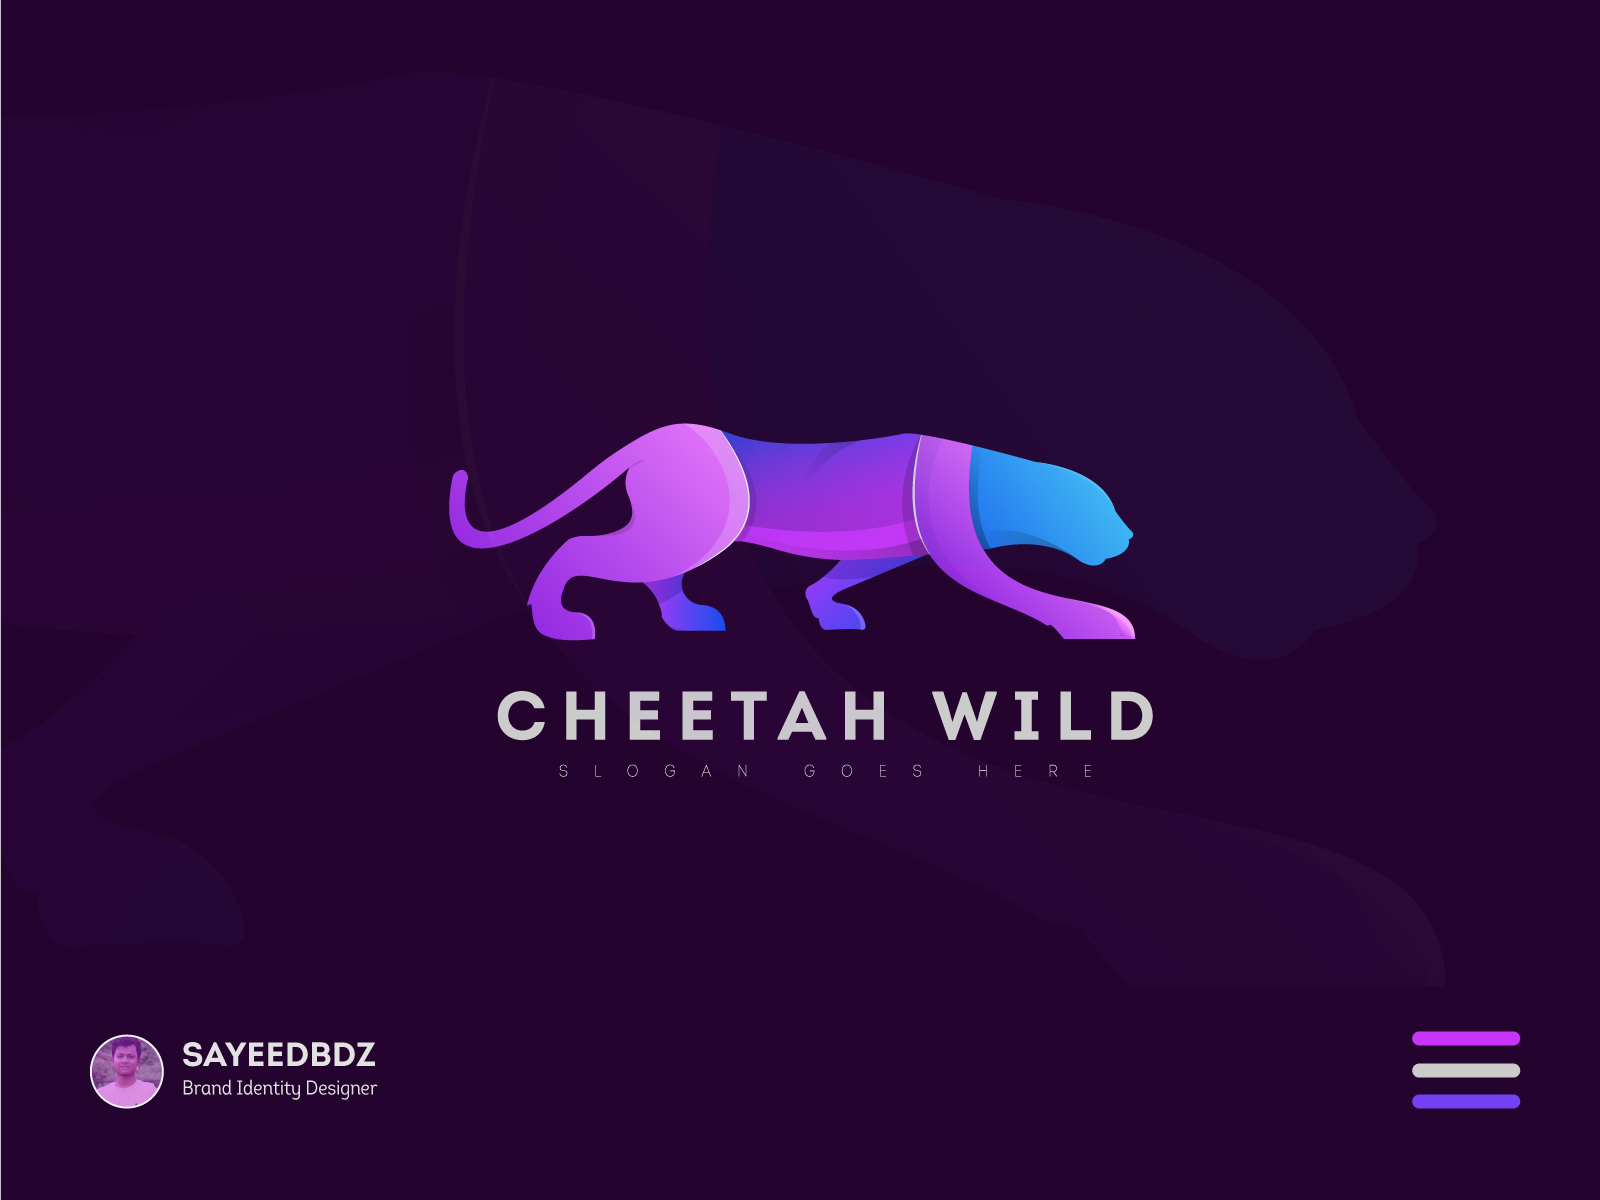 Brand New: New Logo and Identity for Cheetah by Moving Brands